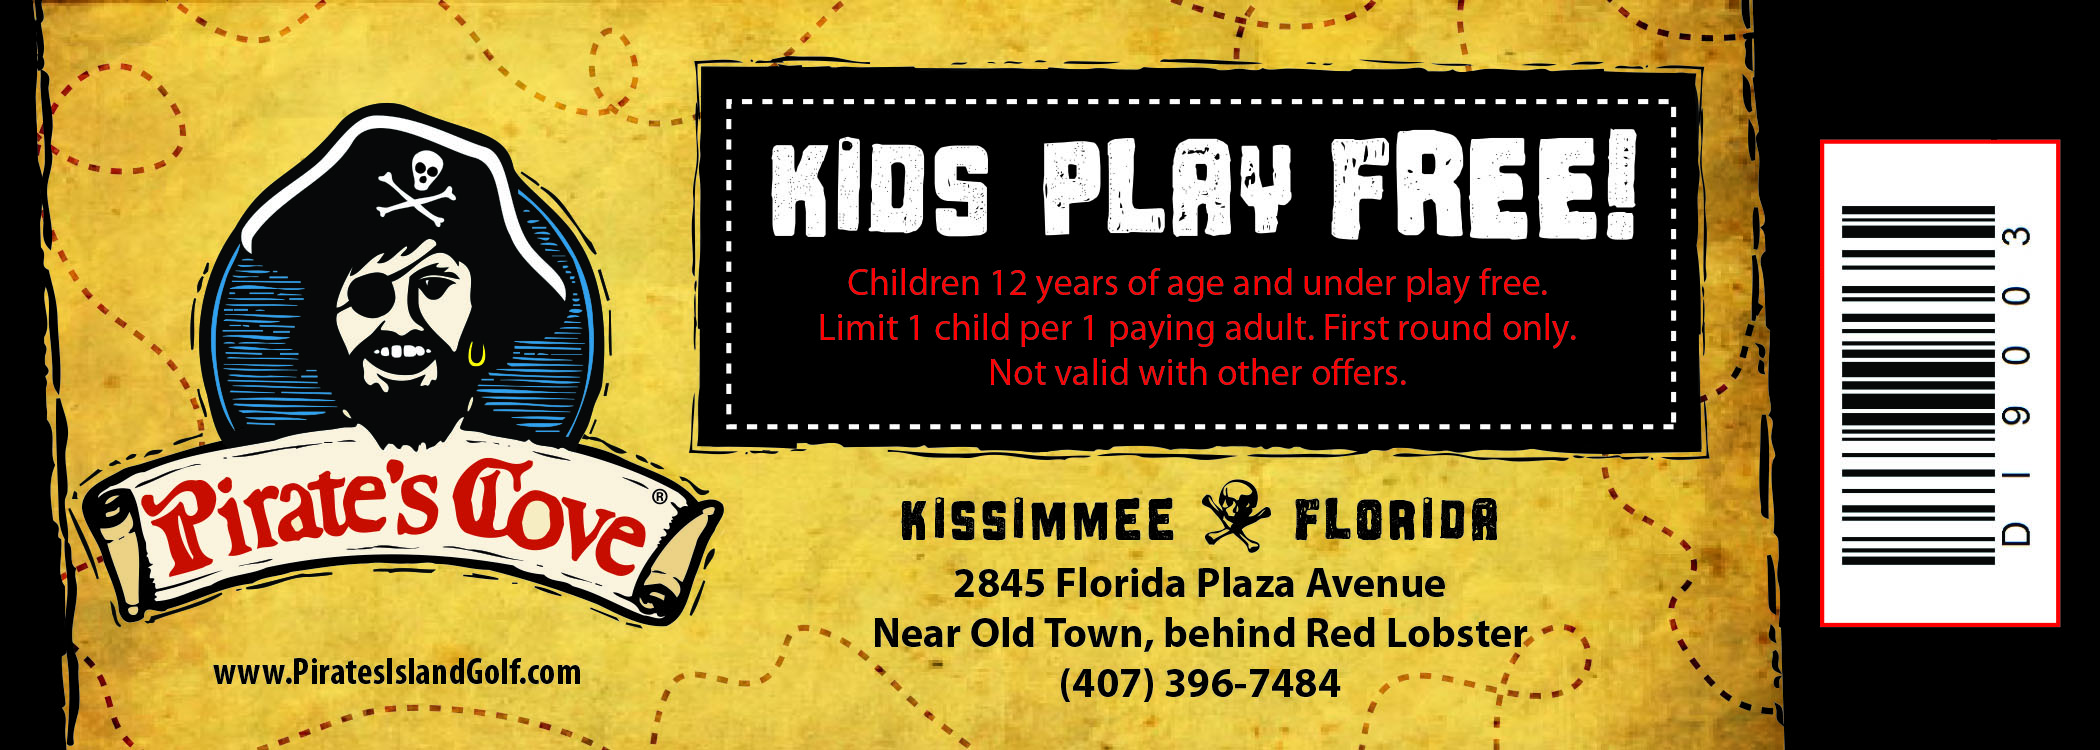 Kid's Play for Free